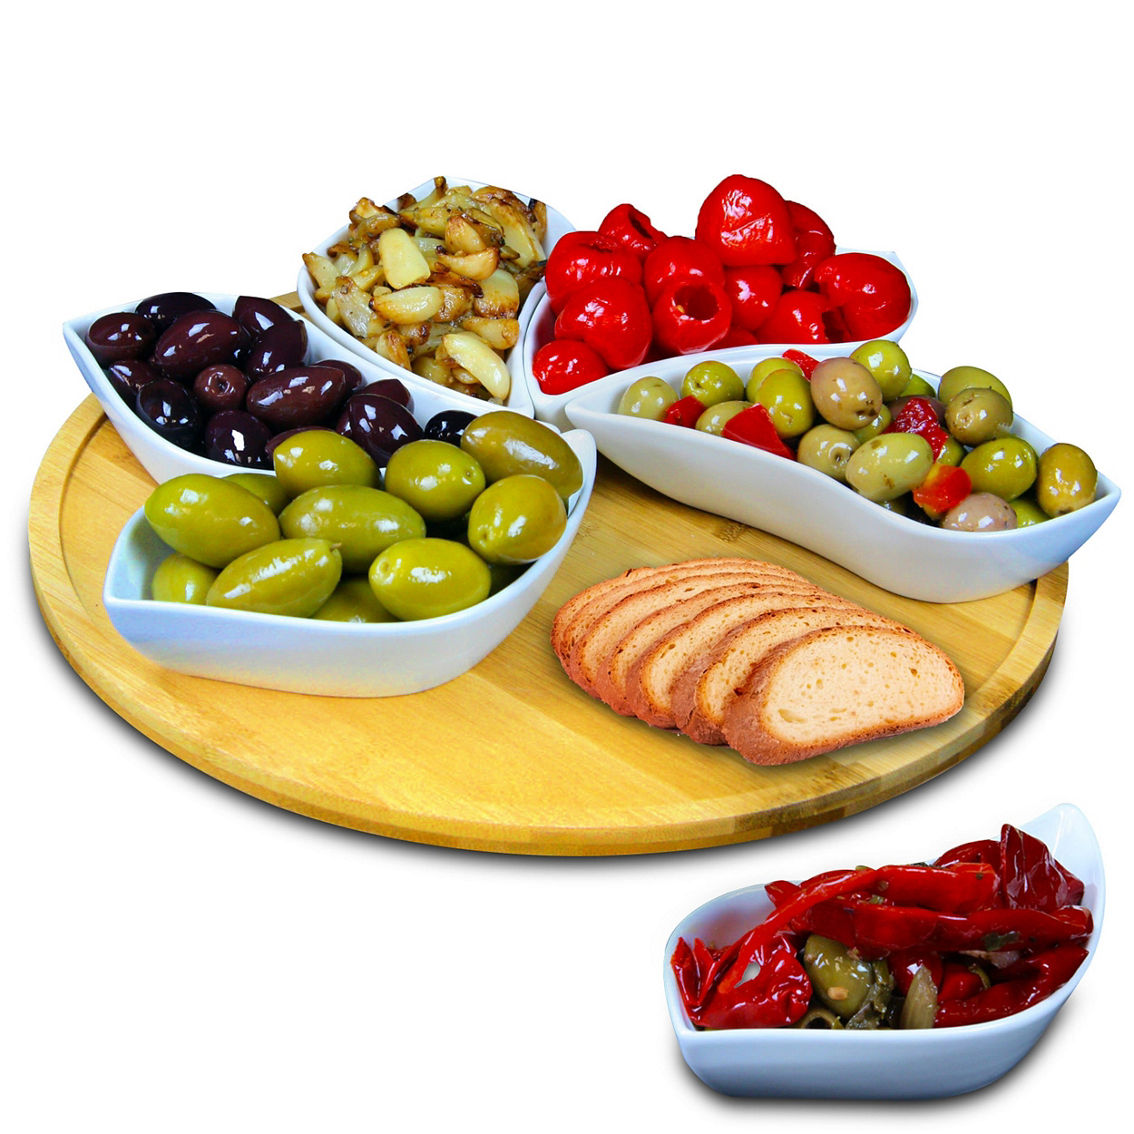 Elama Signature Modern 13.5 Inch 7pc Lazy Susan Appetizer and Condiment Server S - Image 4 of 4